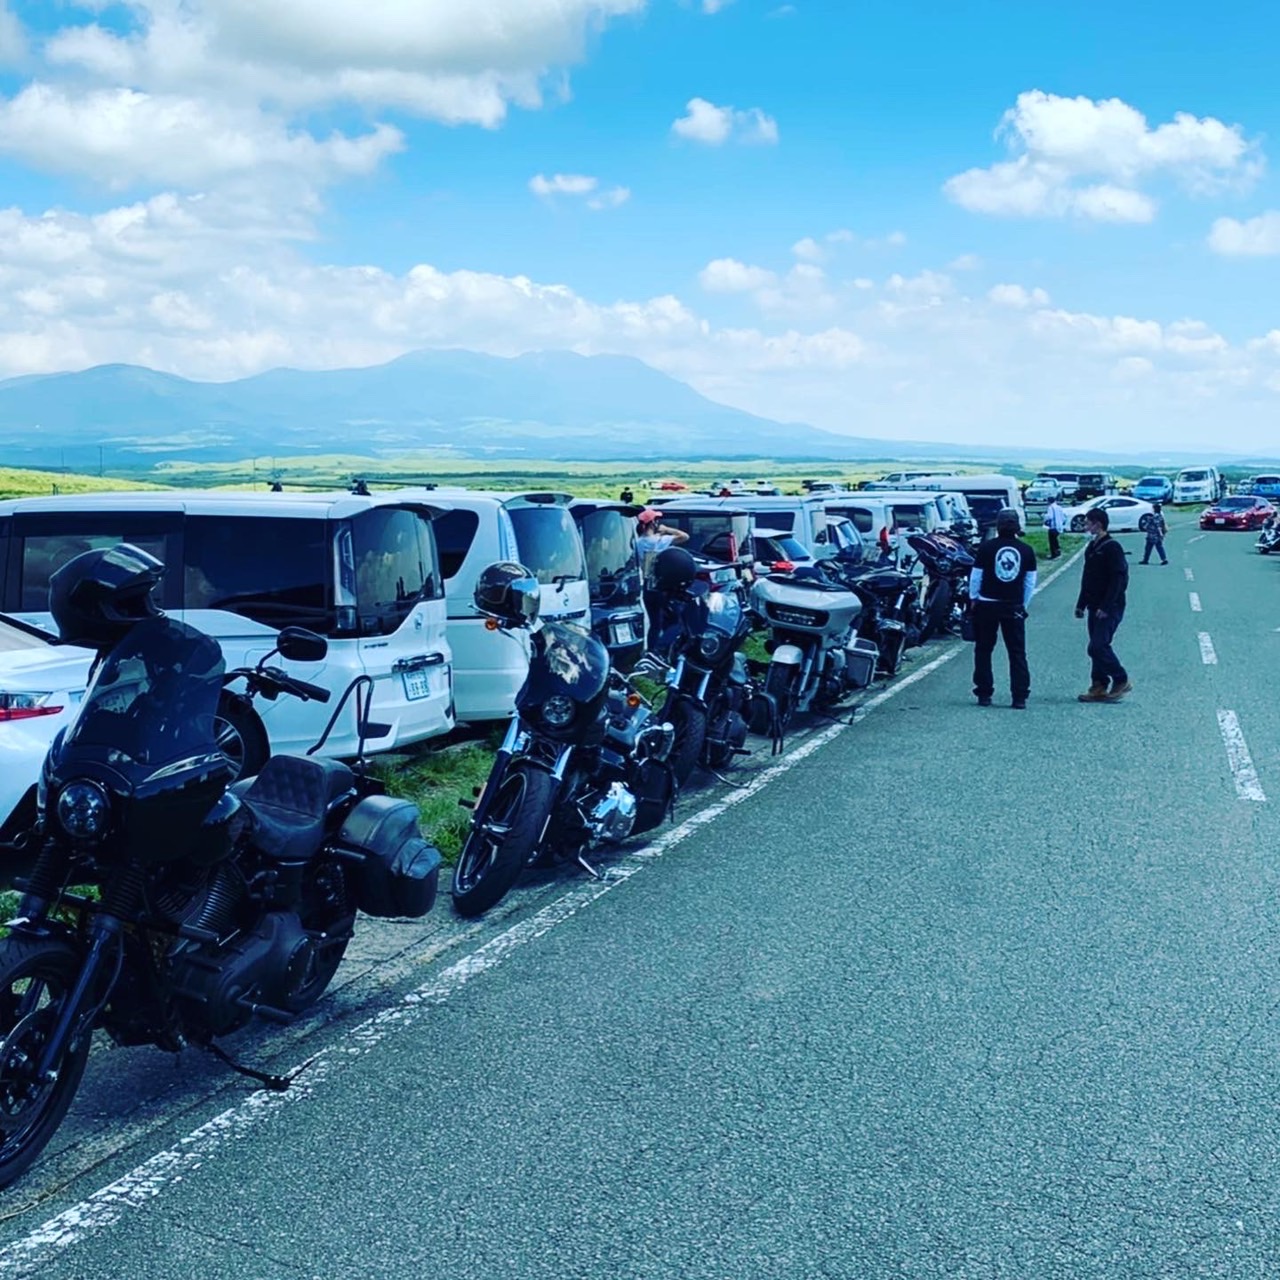 Read more about the article ☆ Harley Davidson Touring 熊本～大分 2021 ☆